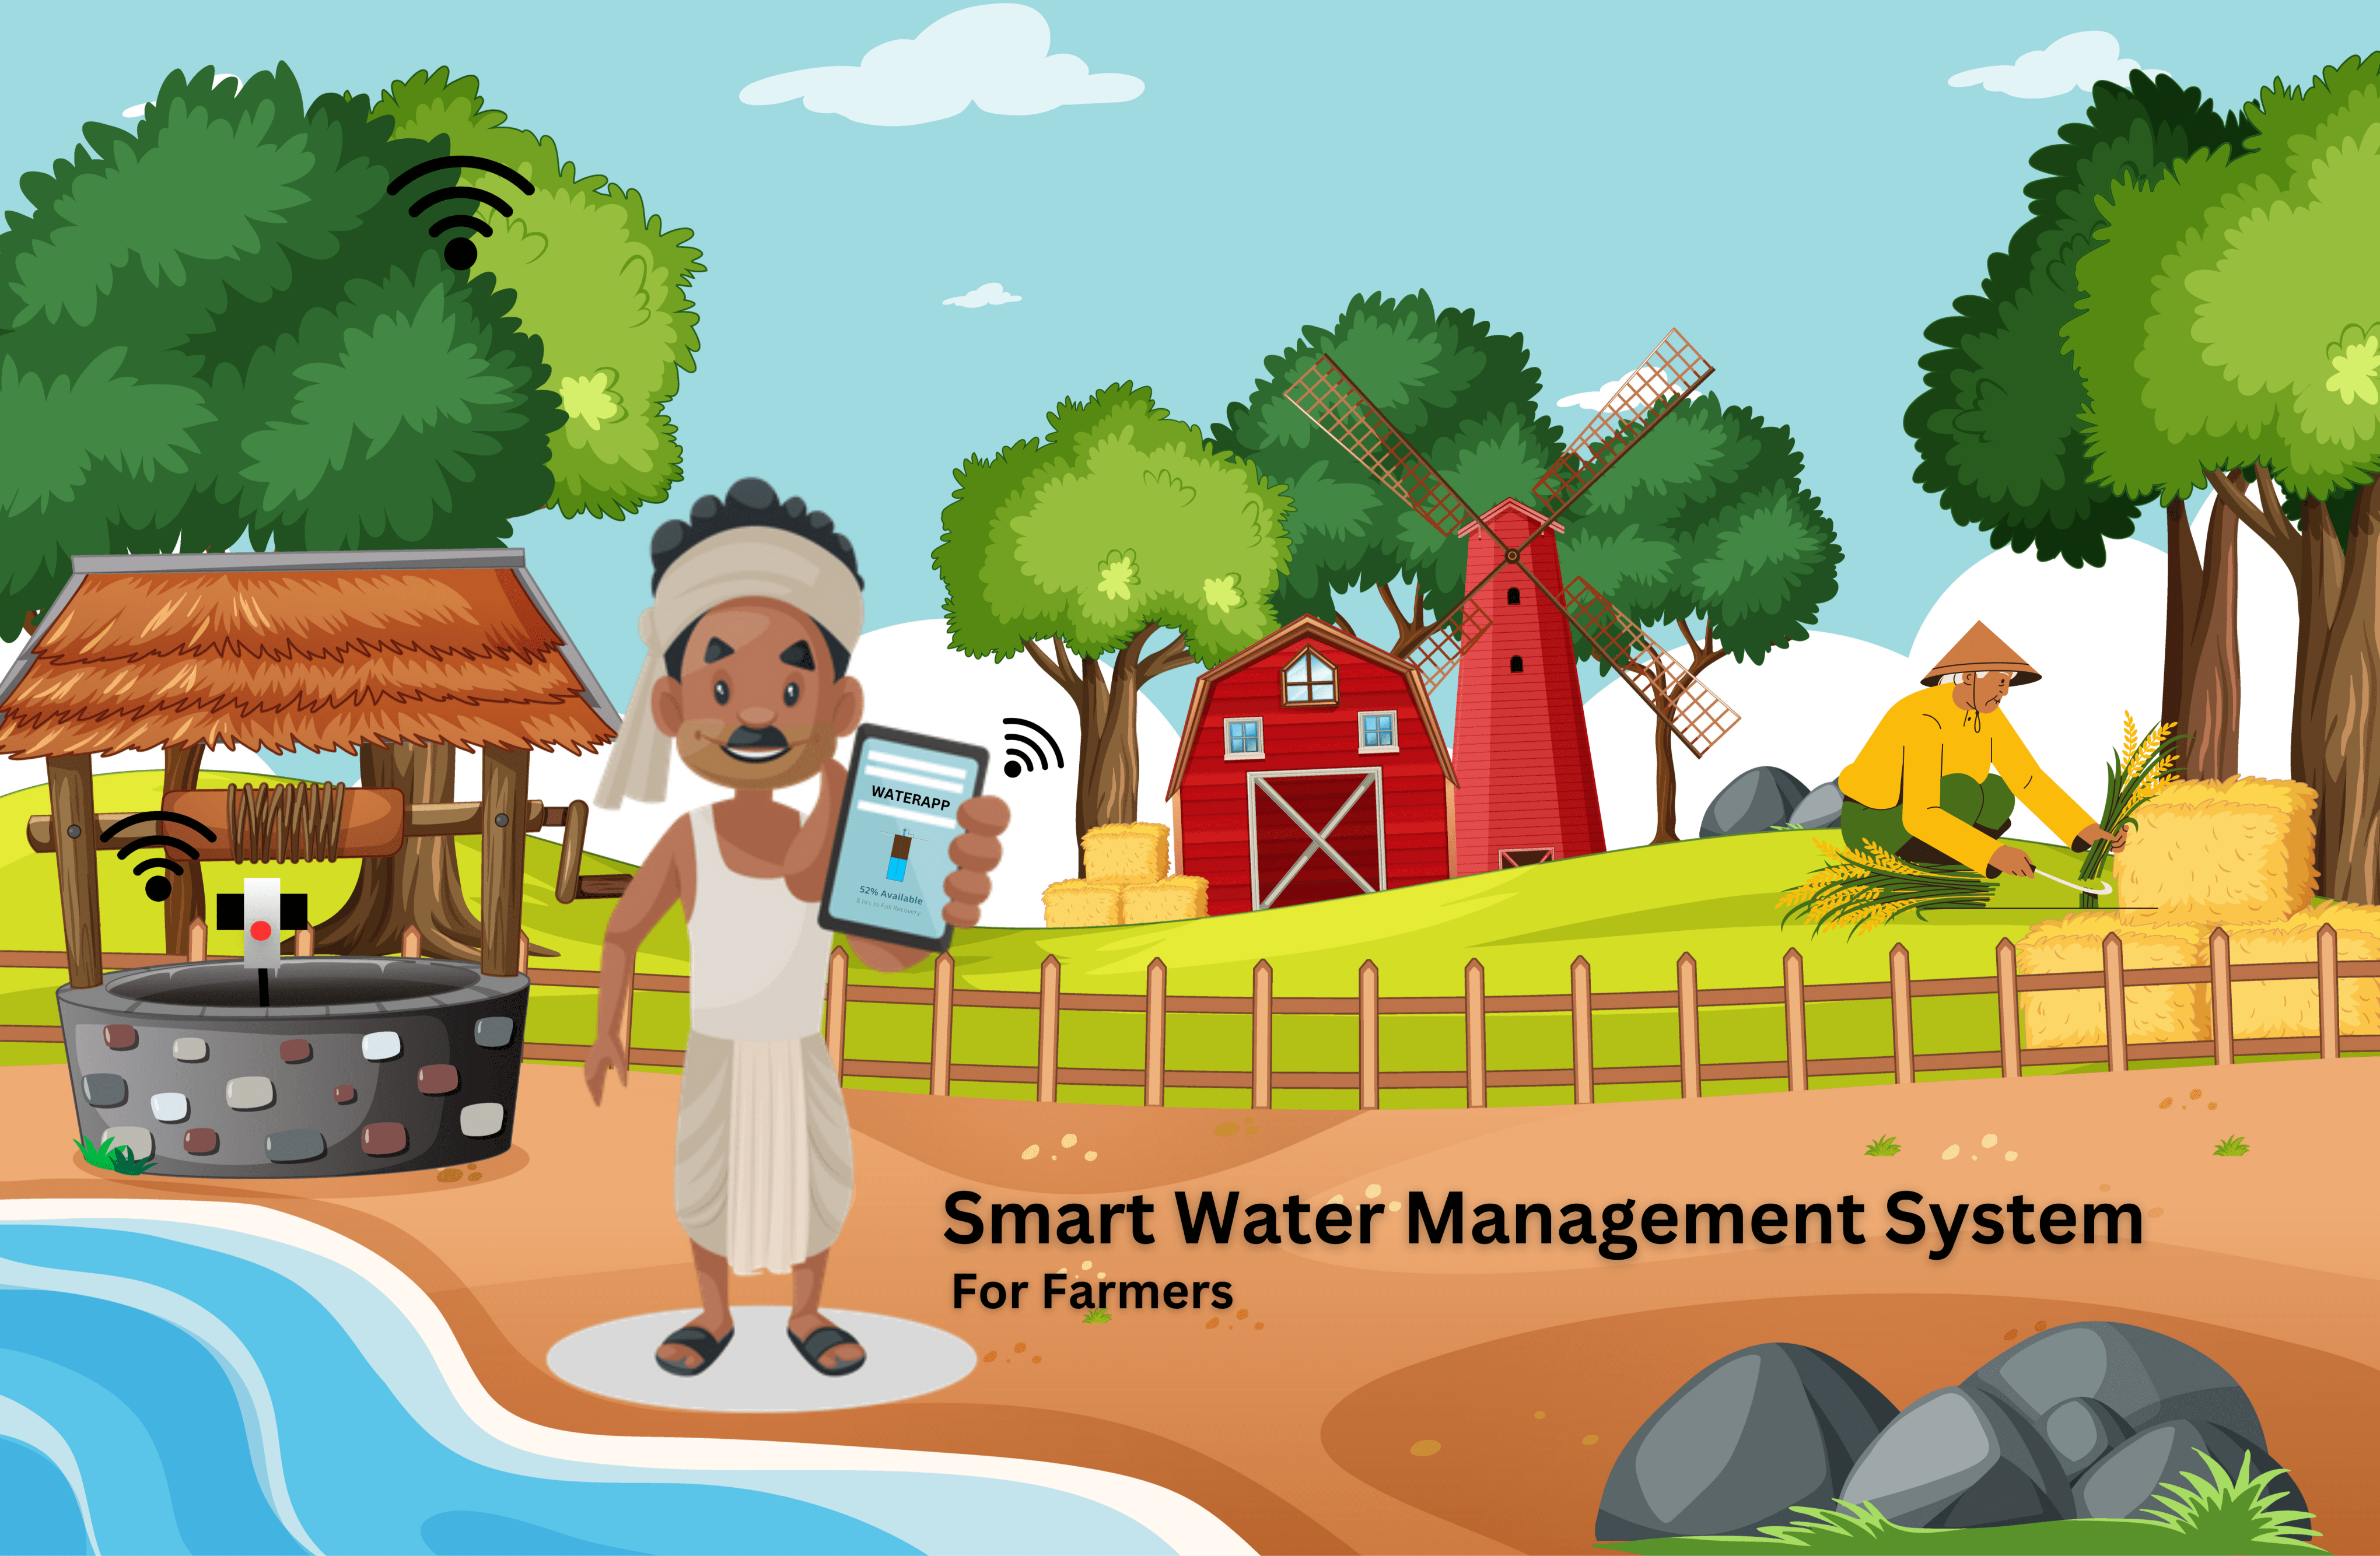 Why Should Farmers Adopt Smart Water Management System